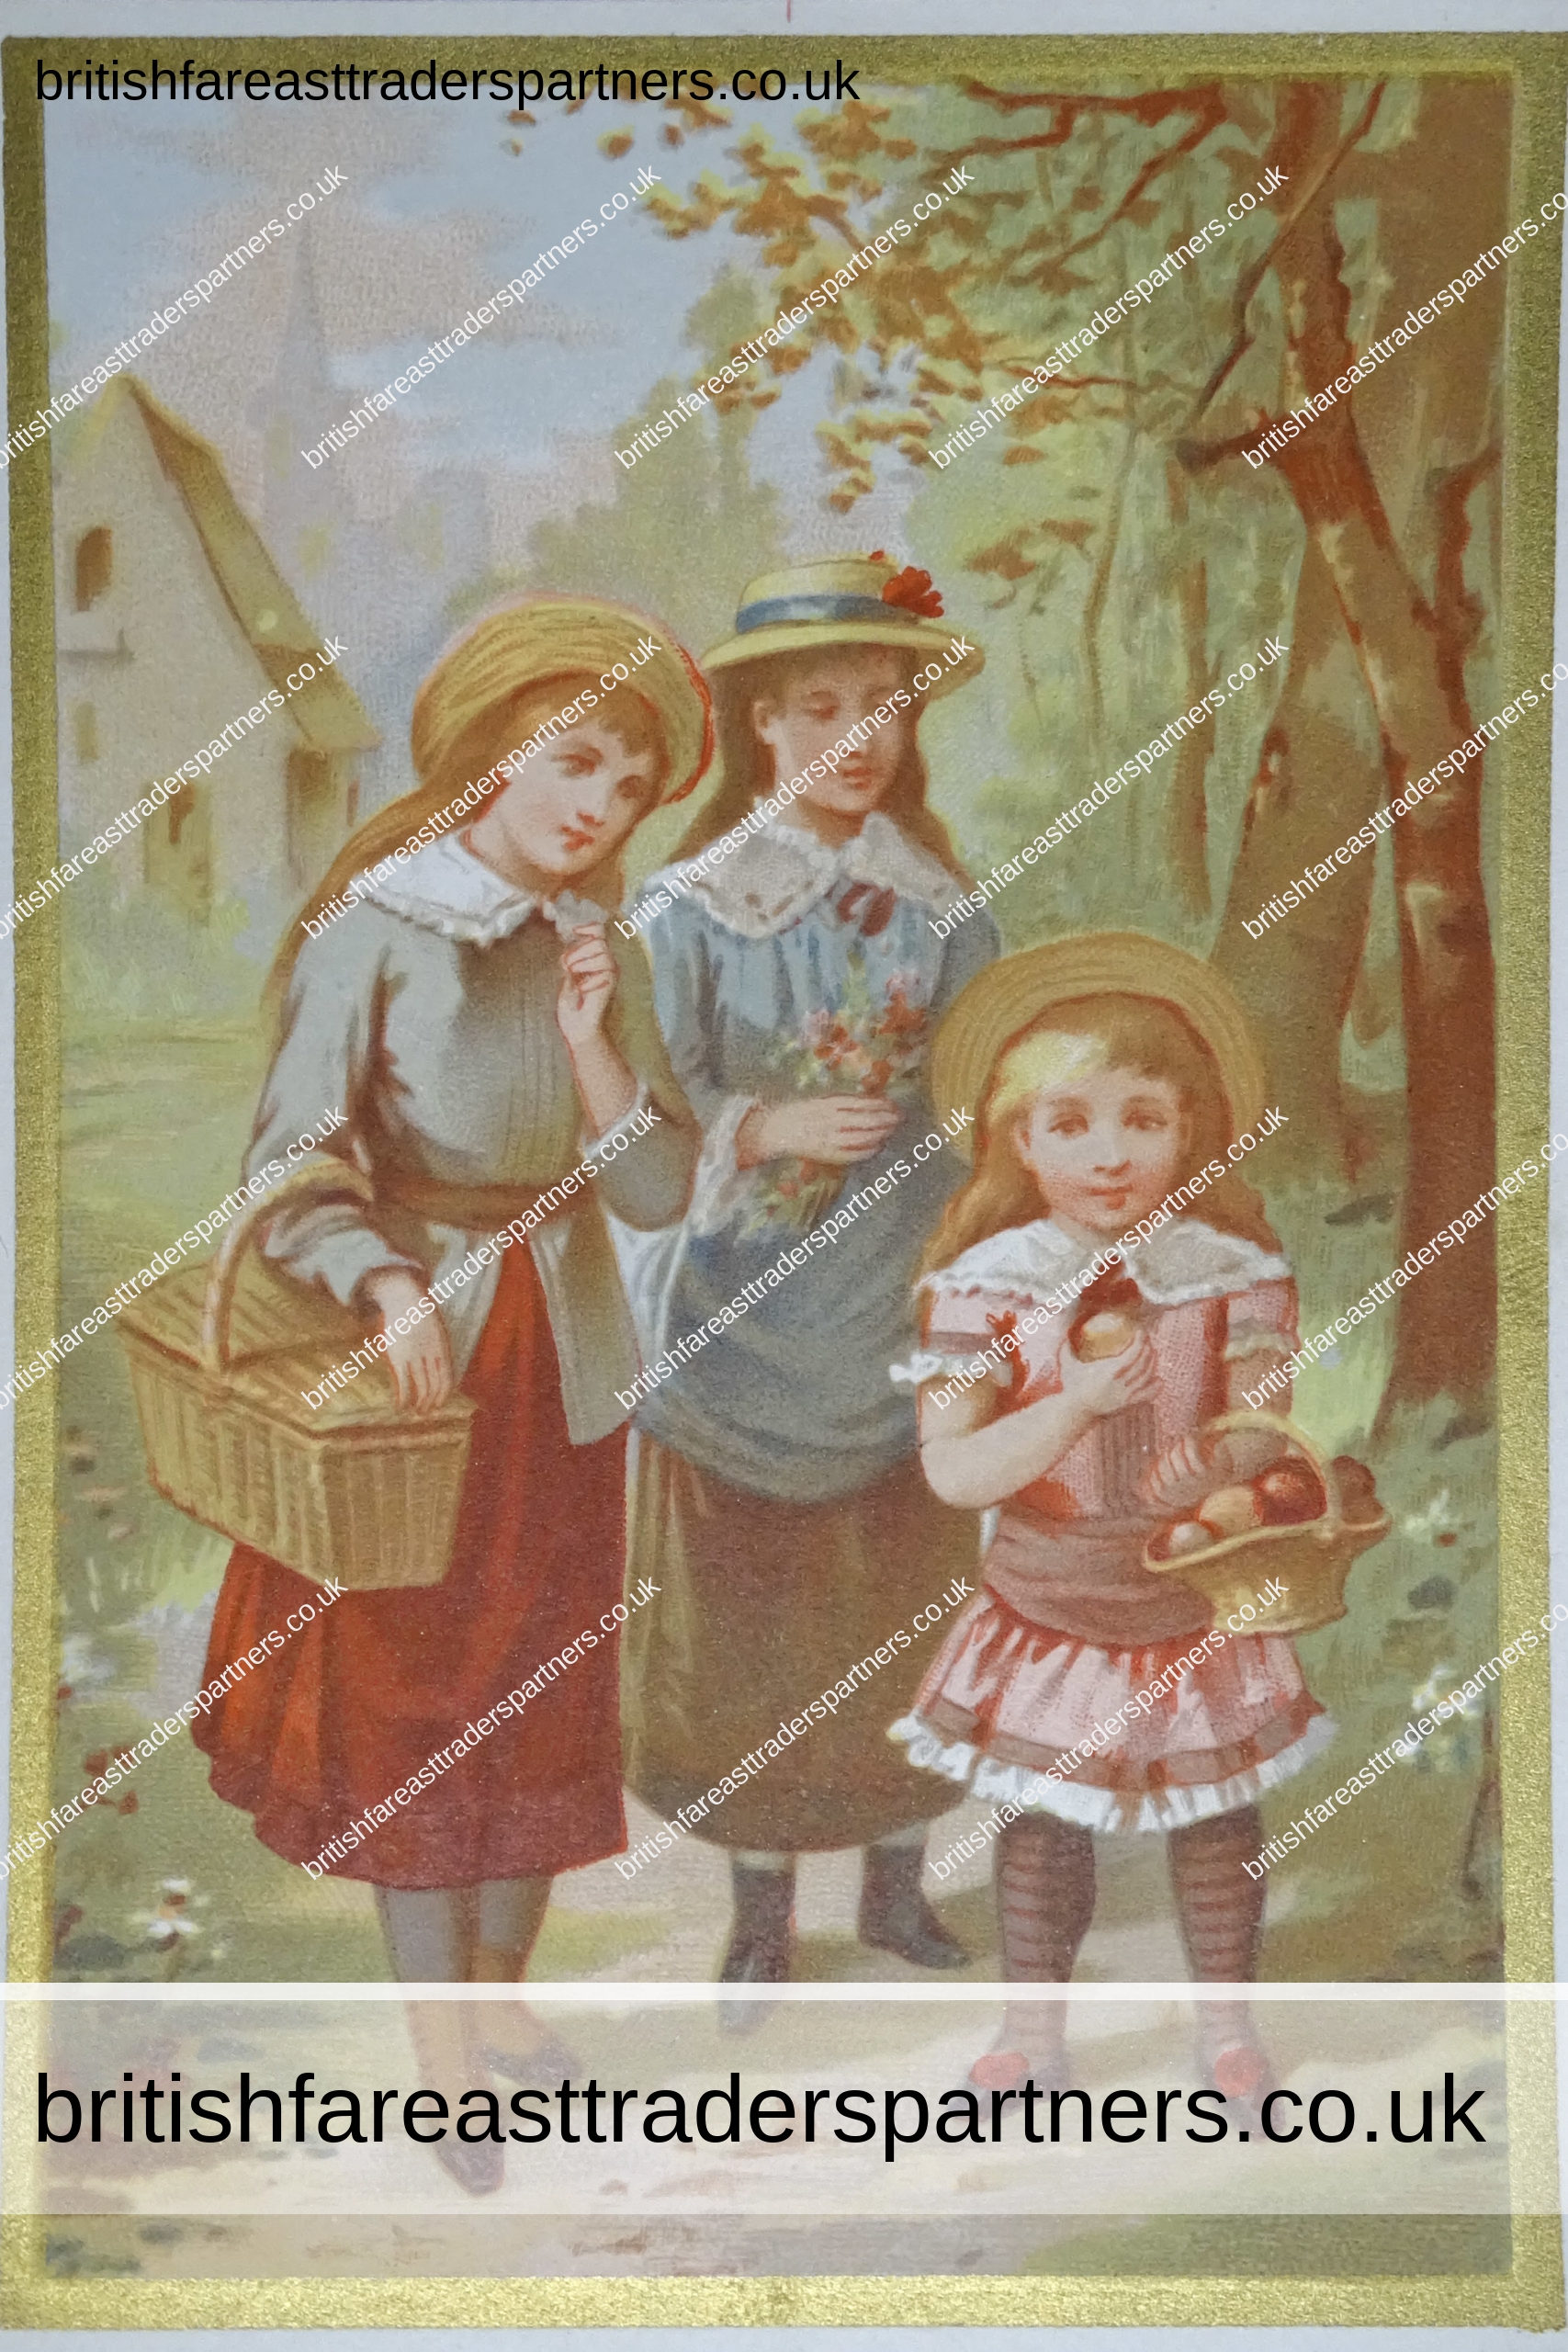 ANTIQUE VICTORIAN ART PRINT CARD YOUNG GIRLS / LADIES IN TRADITIONAL DRESSES / COSTUMES COUNTRYSIDE | SUMMERTIME | VILLAGE  VINTAGE & ANTIQUES | COLLECTABLES ART | LIFESTYLE | HERITAGE | CULTURE